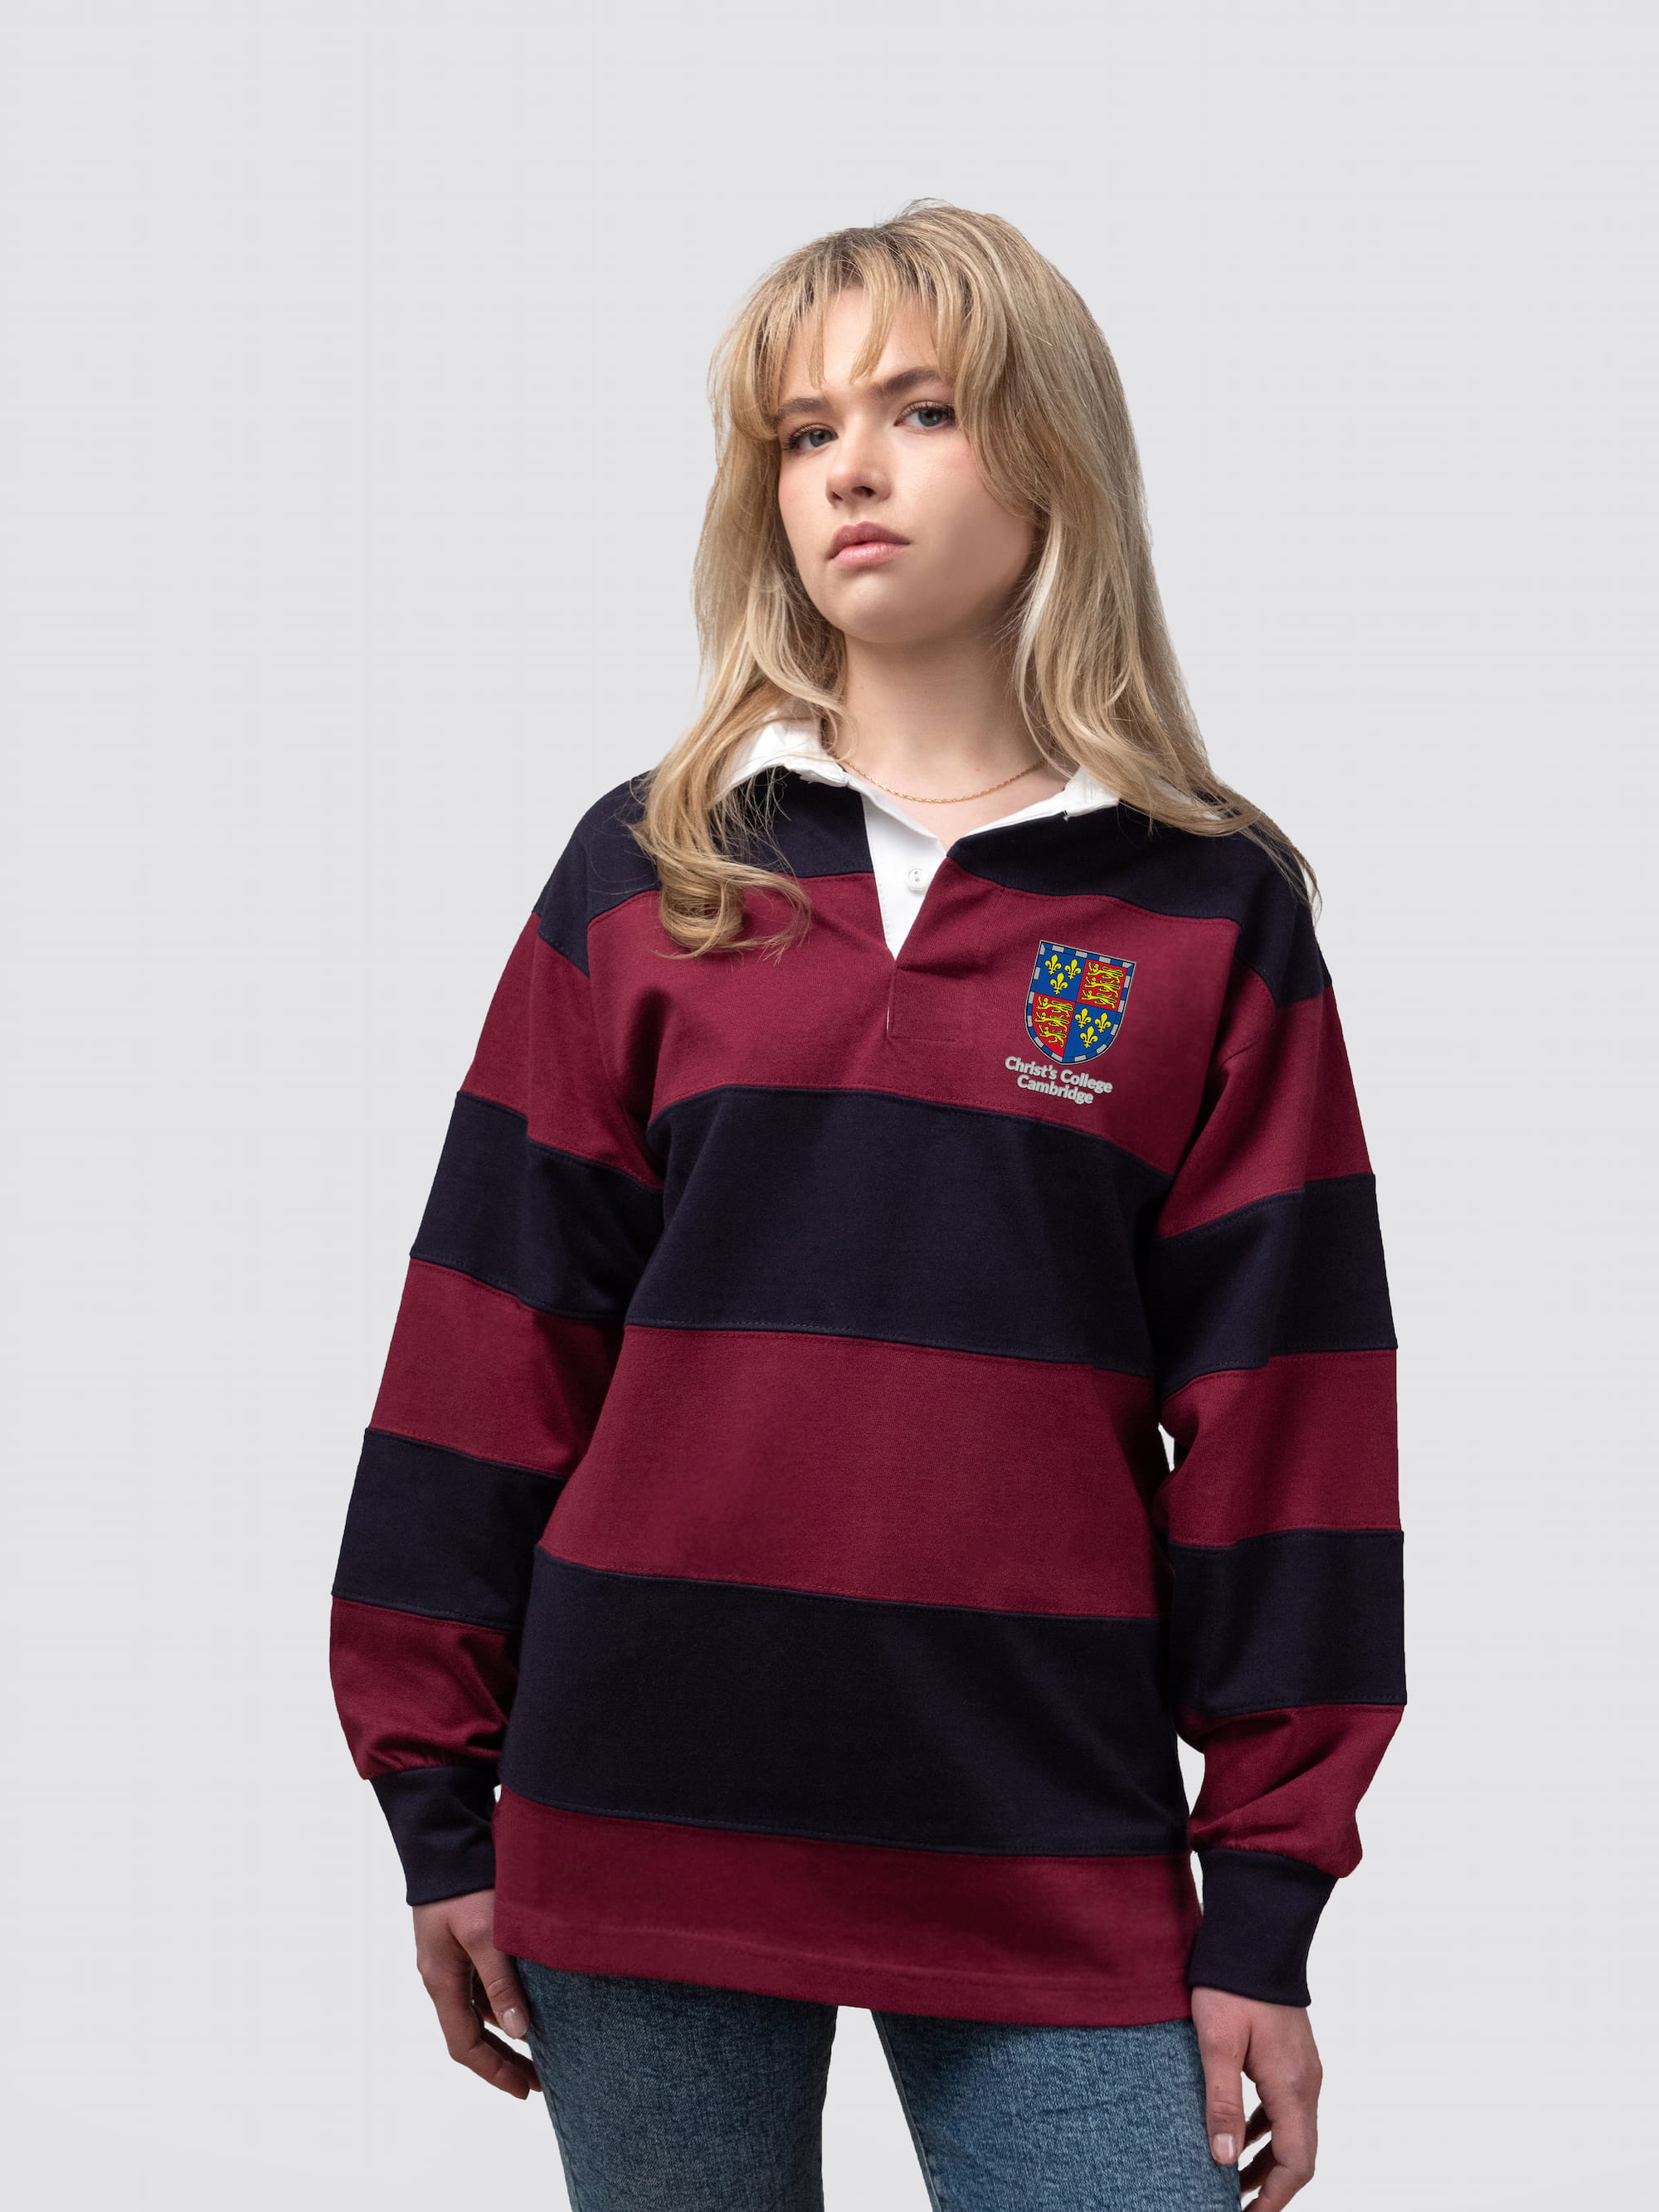 Christ's College rugby shirt, with burgundy and navy stripes